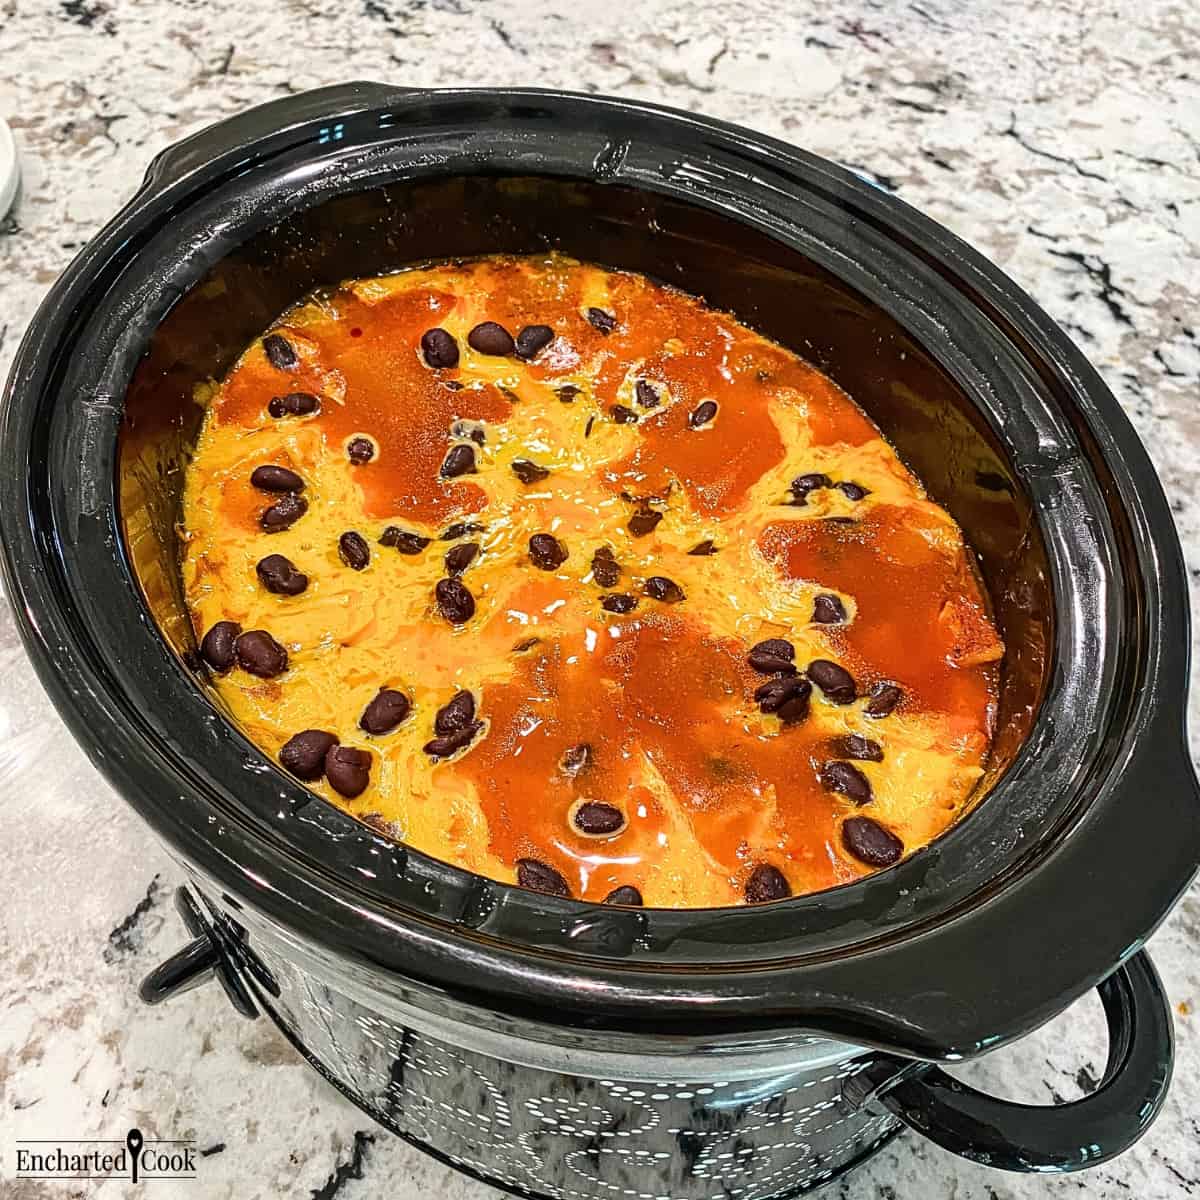 The cheddar cheese is completely melted and the enchilada casserole is fully cooked in the crock pot.